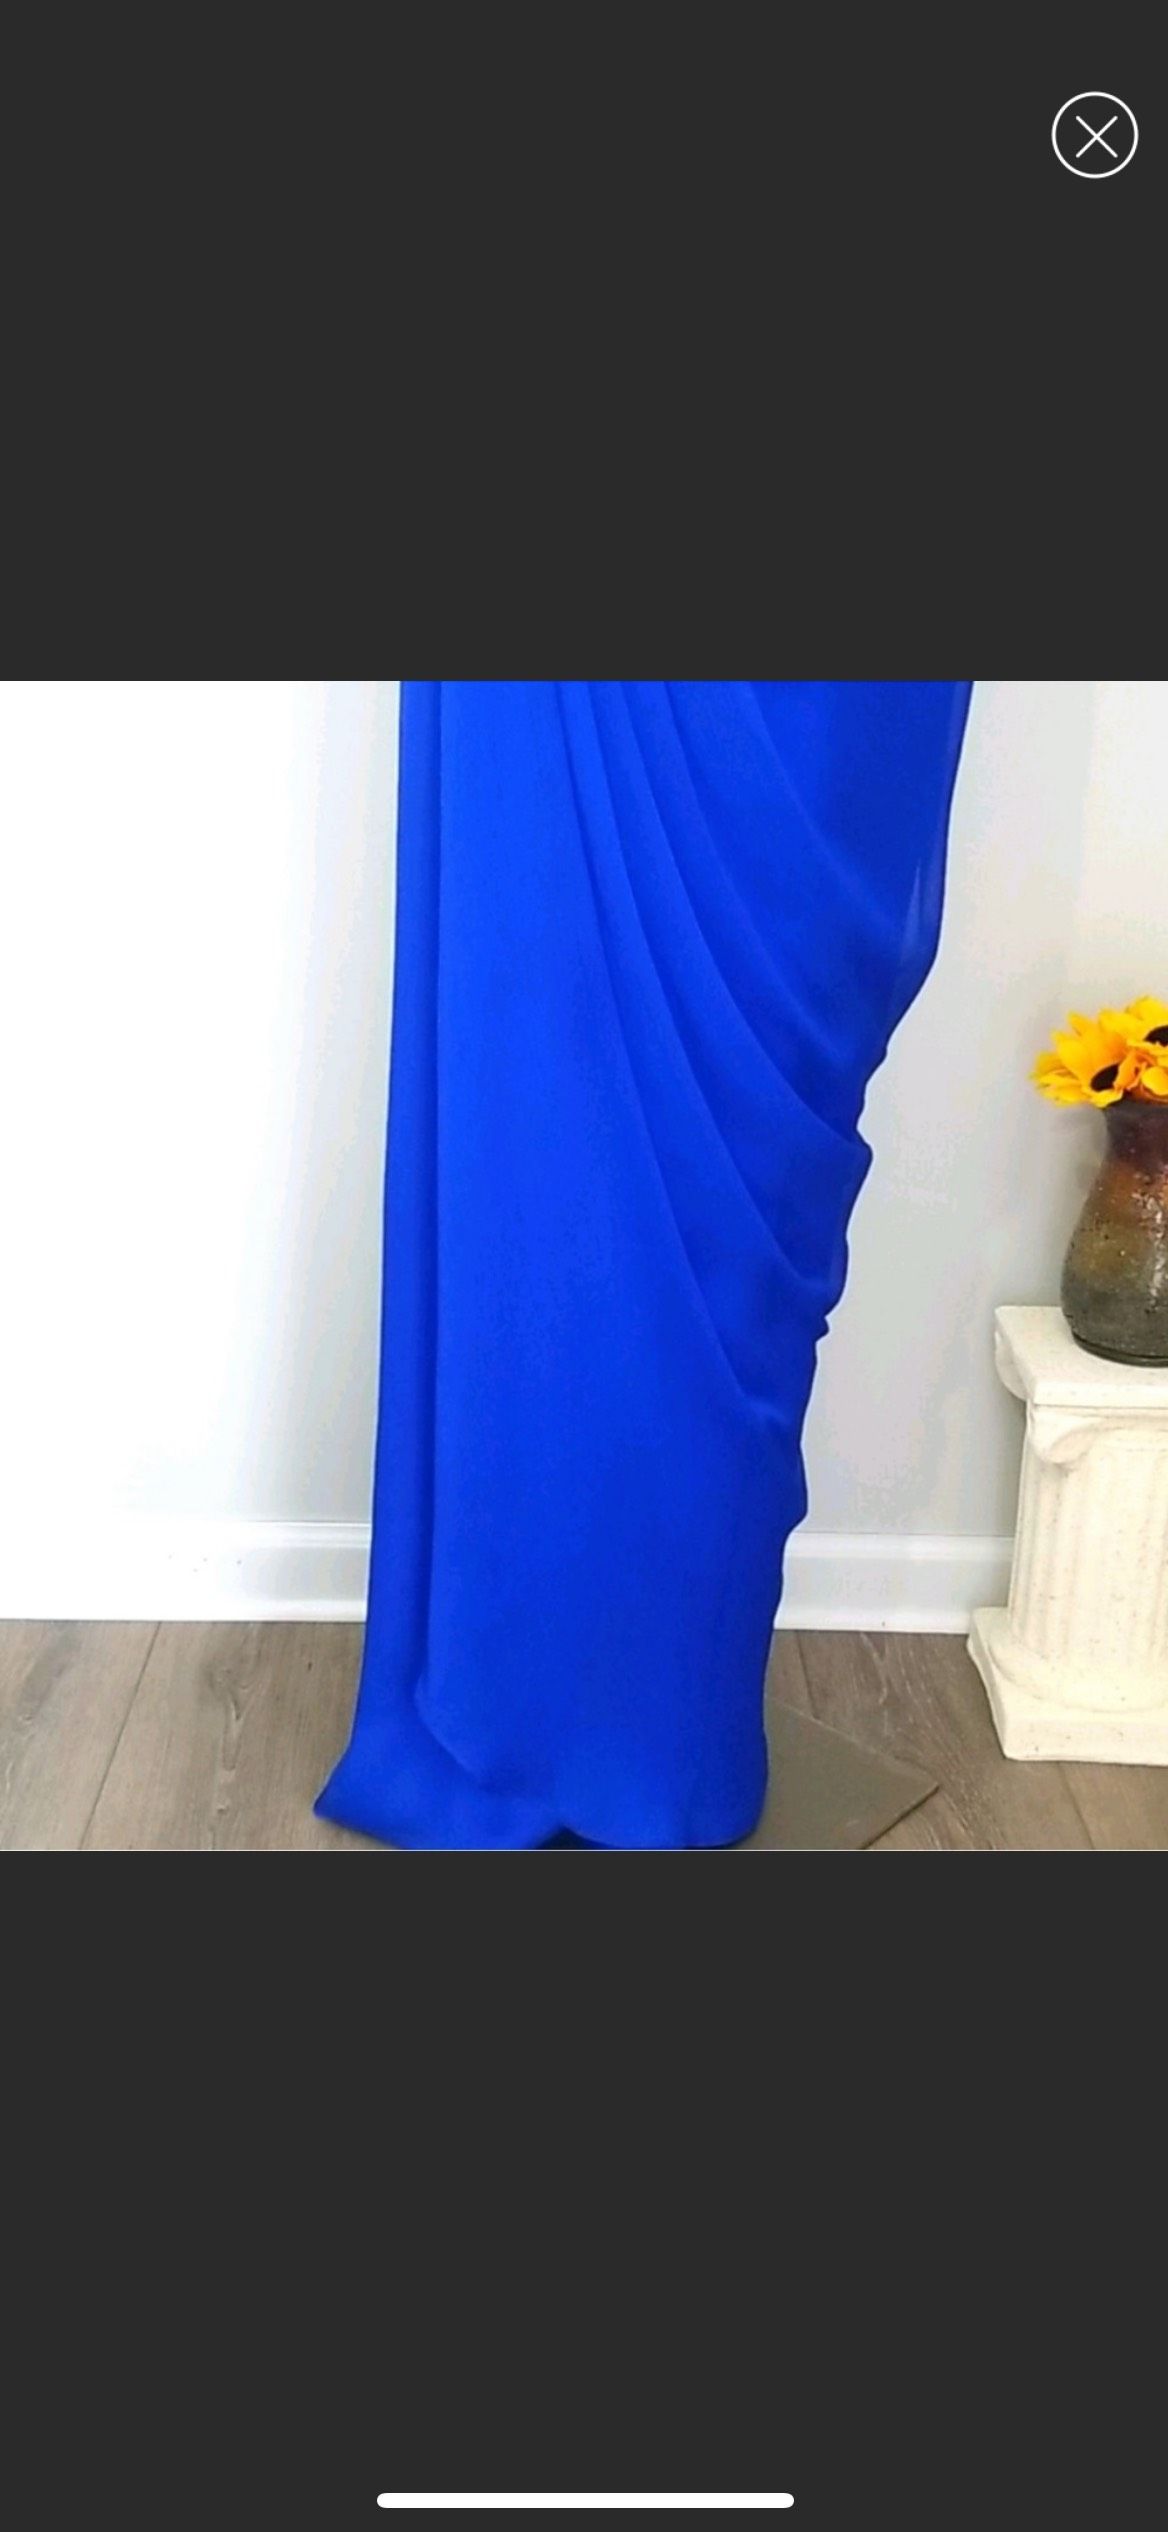 Aidan Mattox Size 10 Prom Blue Floor Length Maxi on Queenly